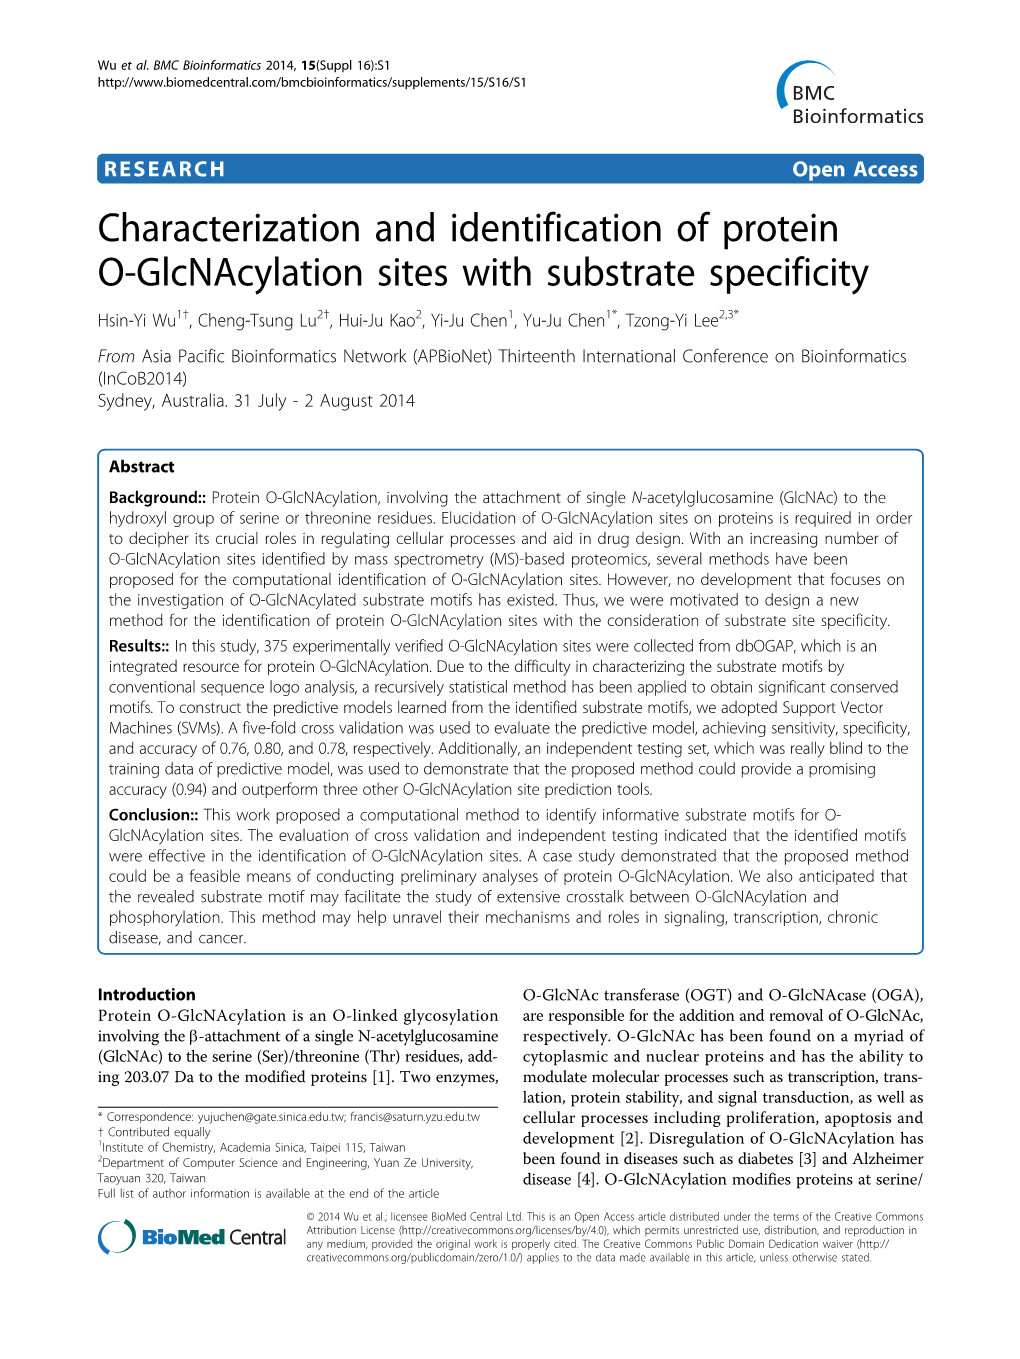 Characterization and Identification of Protein O-Glcnacylation Sites with Substrate Specificity